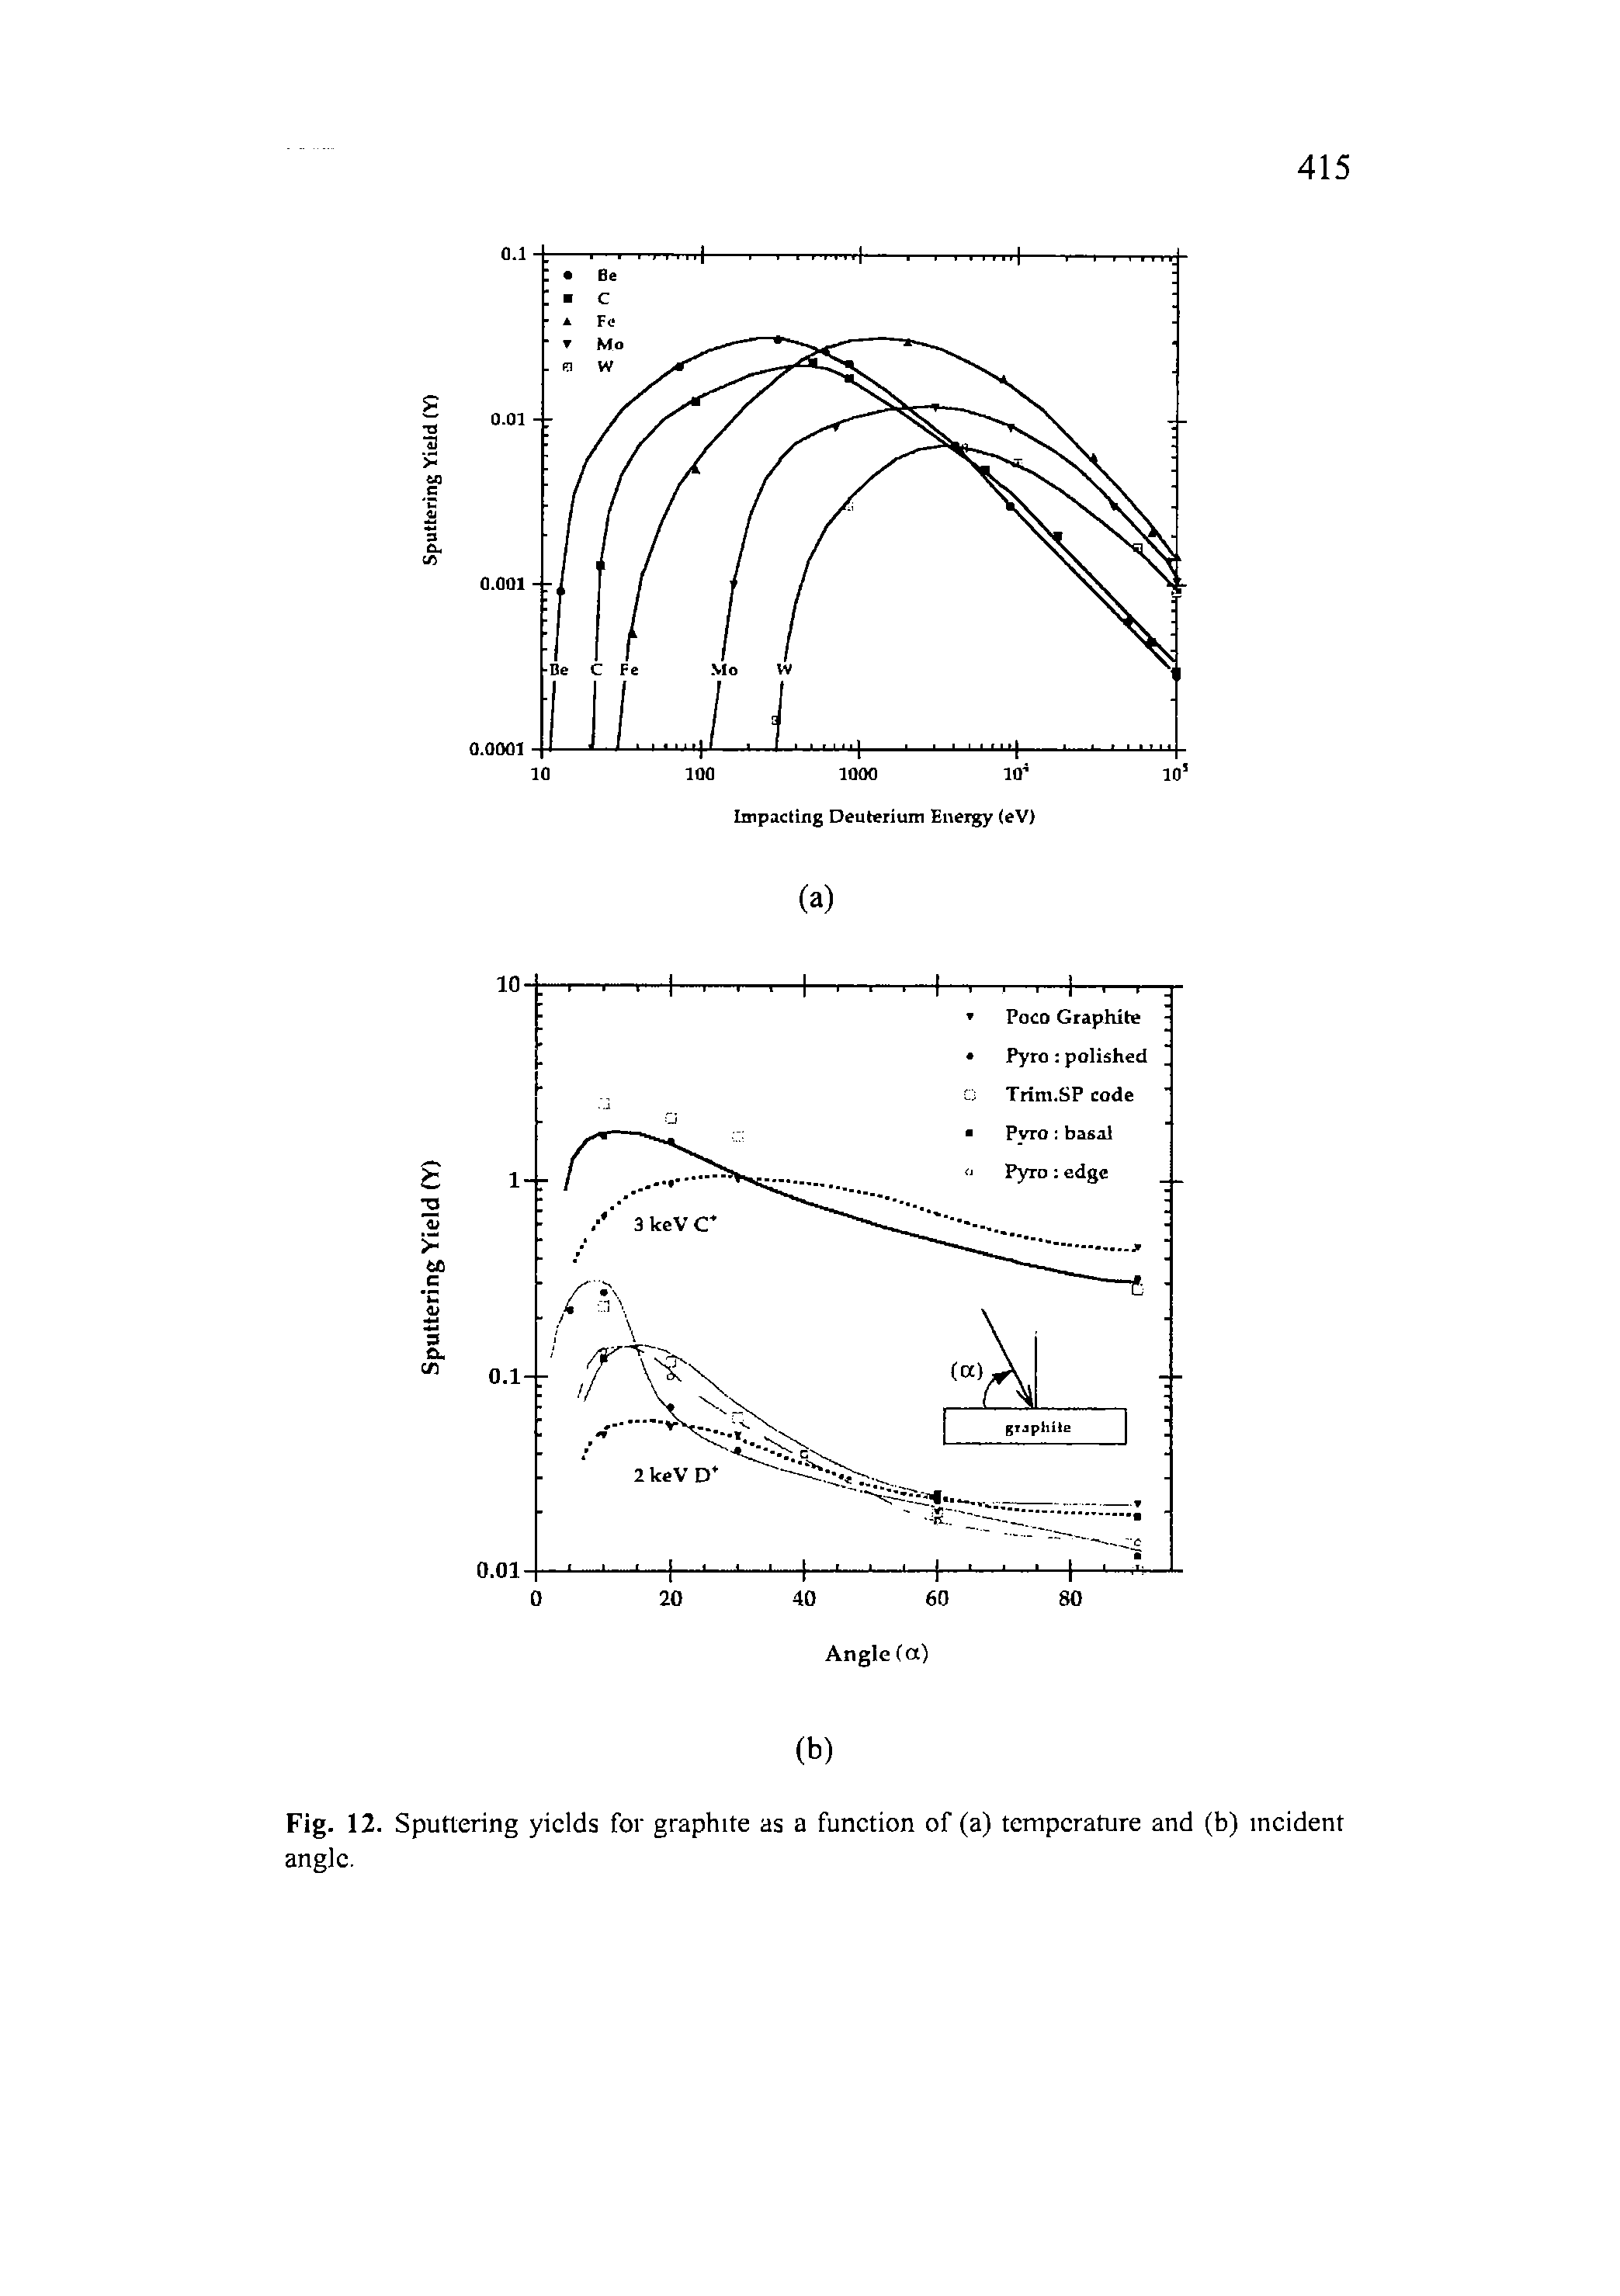 Fig. 12. Sputtering yields for graphite as a funetion of (a) temperature and (b) ineident angle.